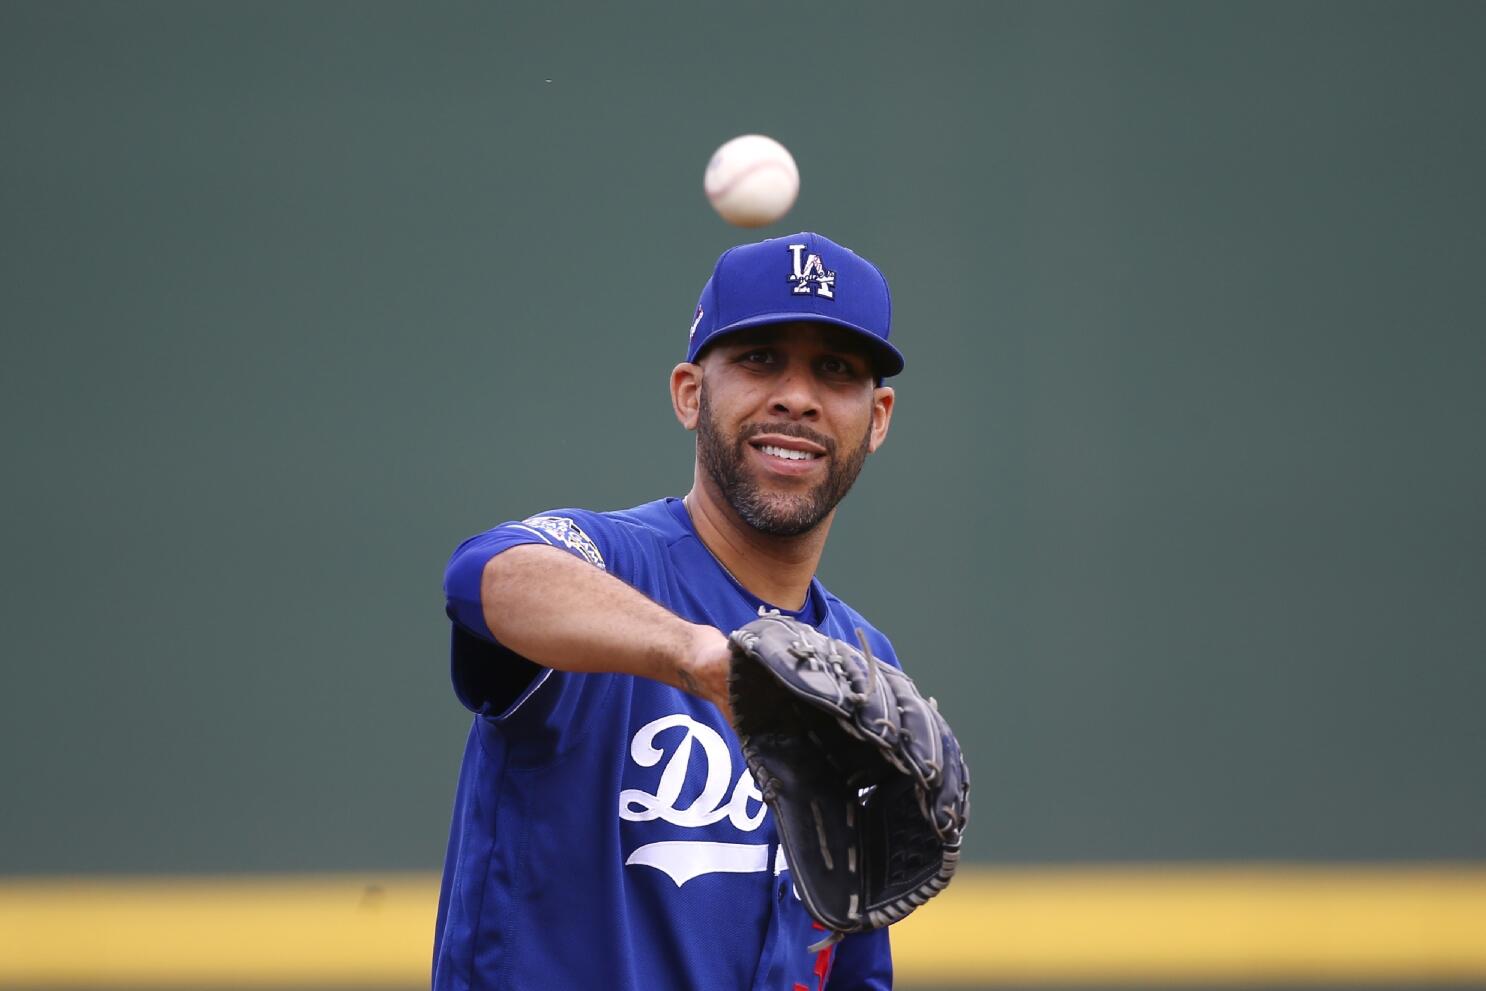 Los Angeles Dodgers: Now is the right time to trade David Price